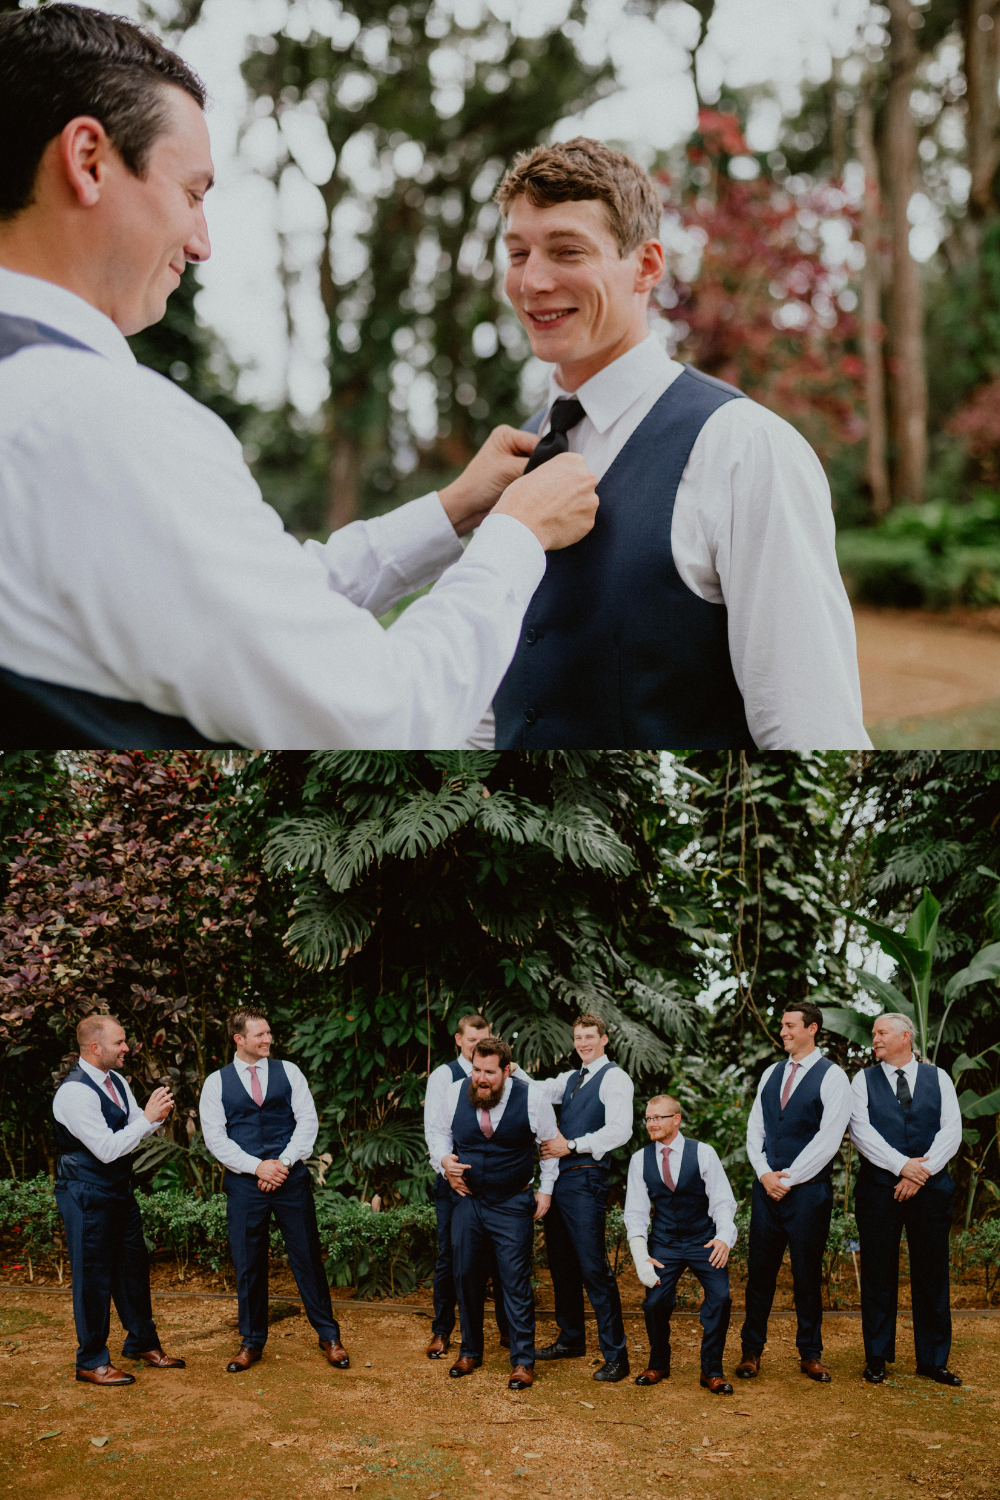 Groom's tie is tied by groomsmen, and wedding party stands on birth path in front of Hawaiian forests with palm fronds in the background | Groom style tips, Groom wedding day inspiration, Groom Tips Wedding, Groom tips for men, Groom tips | chelseaabril.com